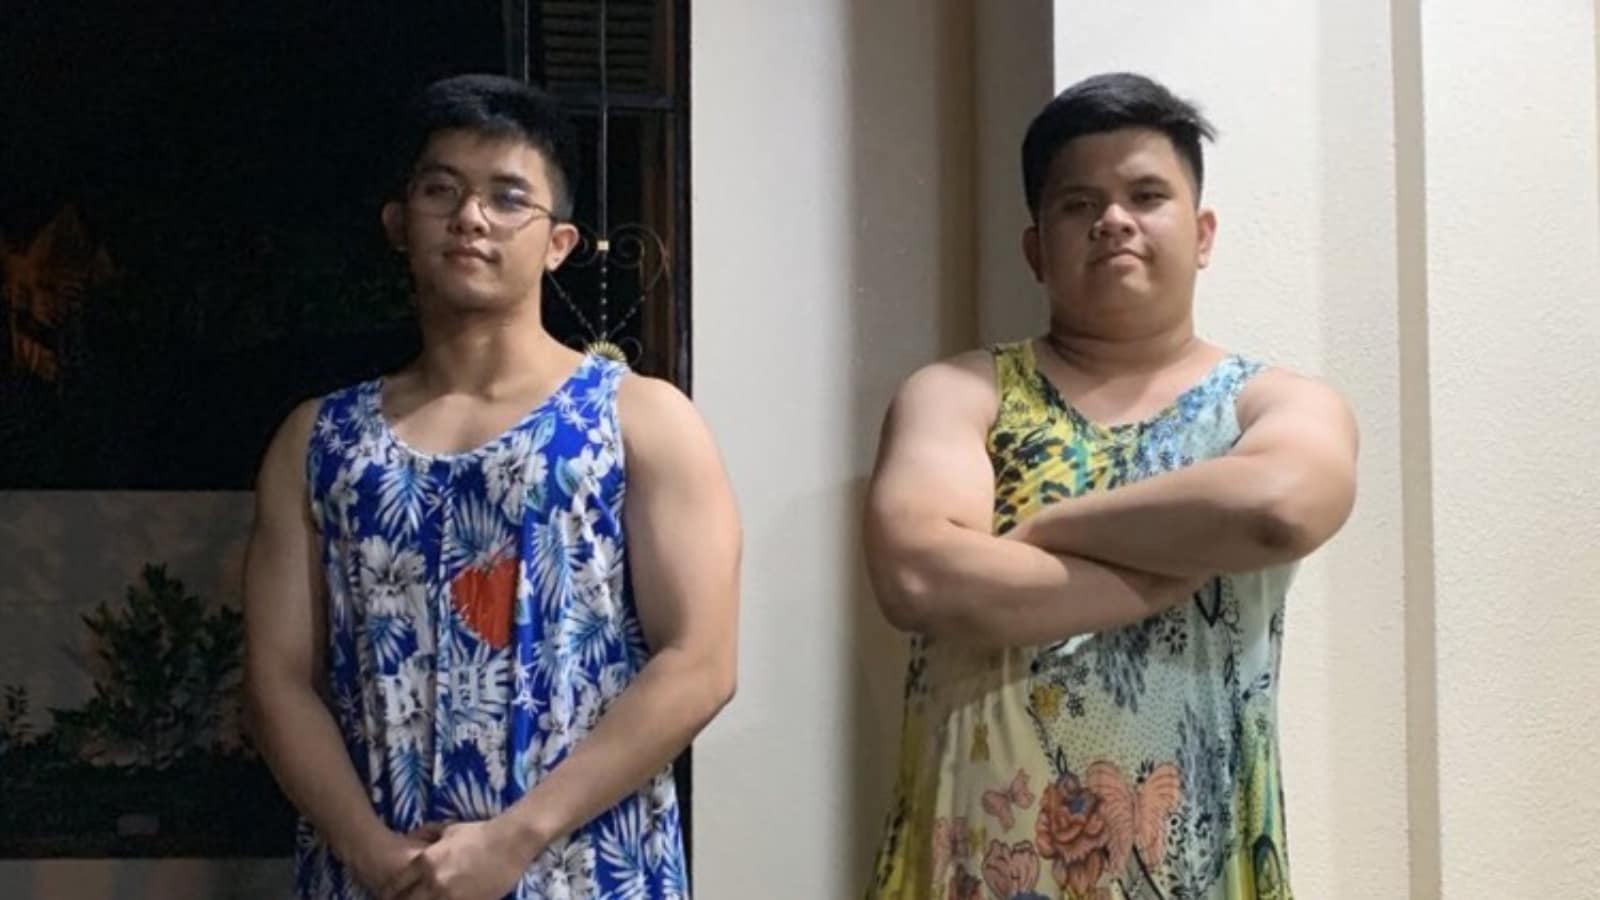 Filipino Author's Suggestion for Men to Wear 'Nighties' in UK Heatwave Gets a Thumbs Up